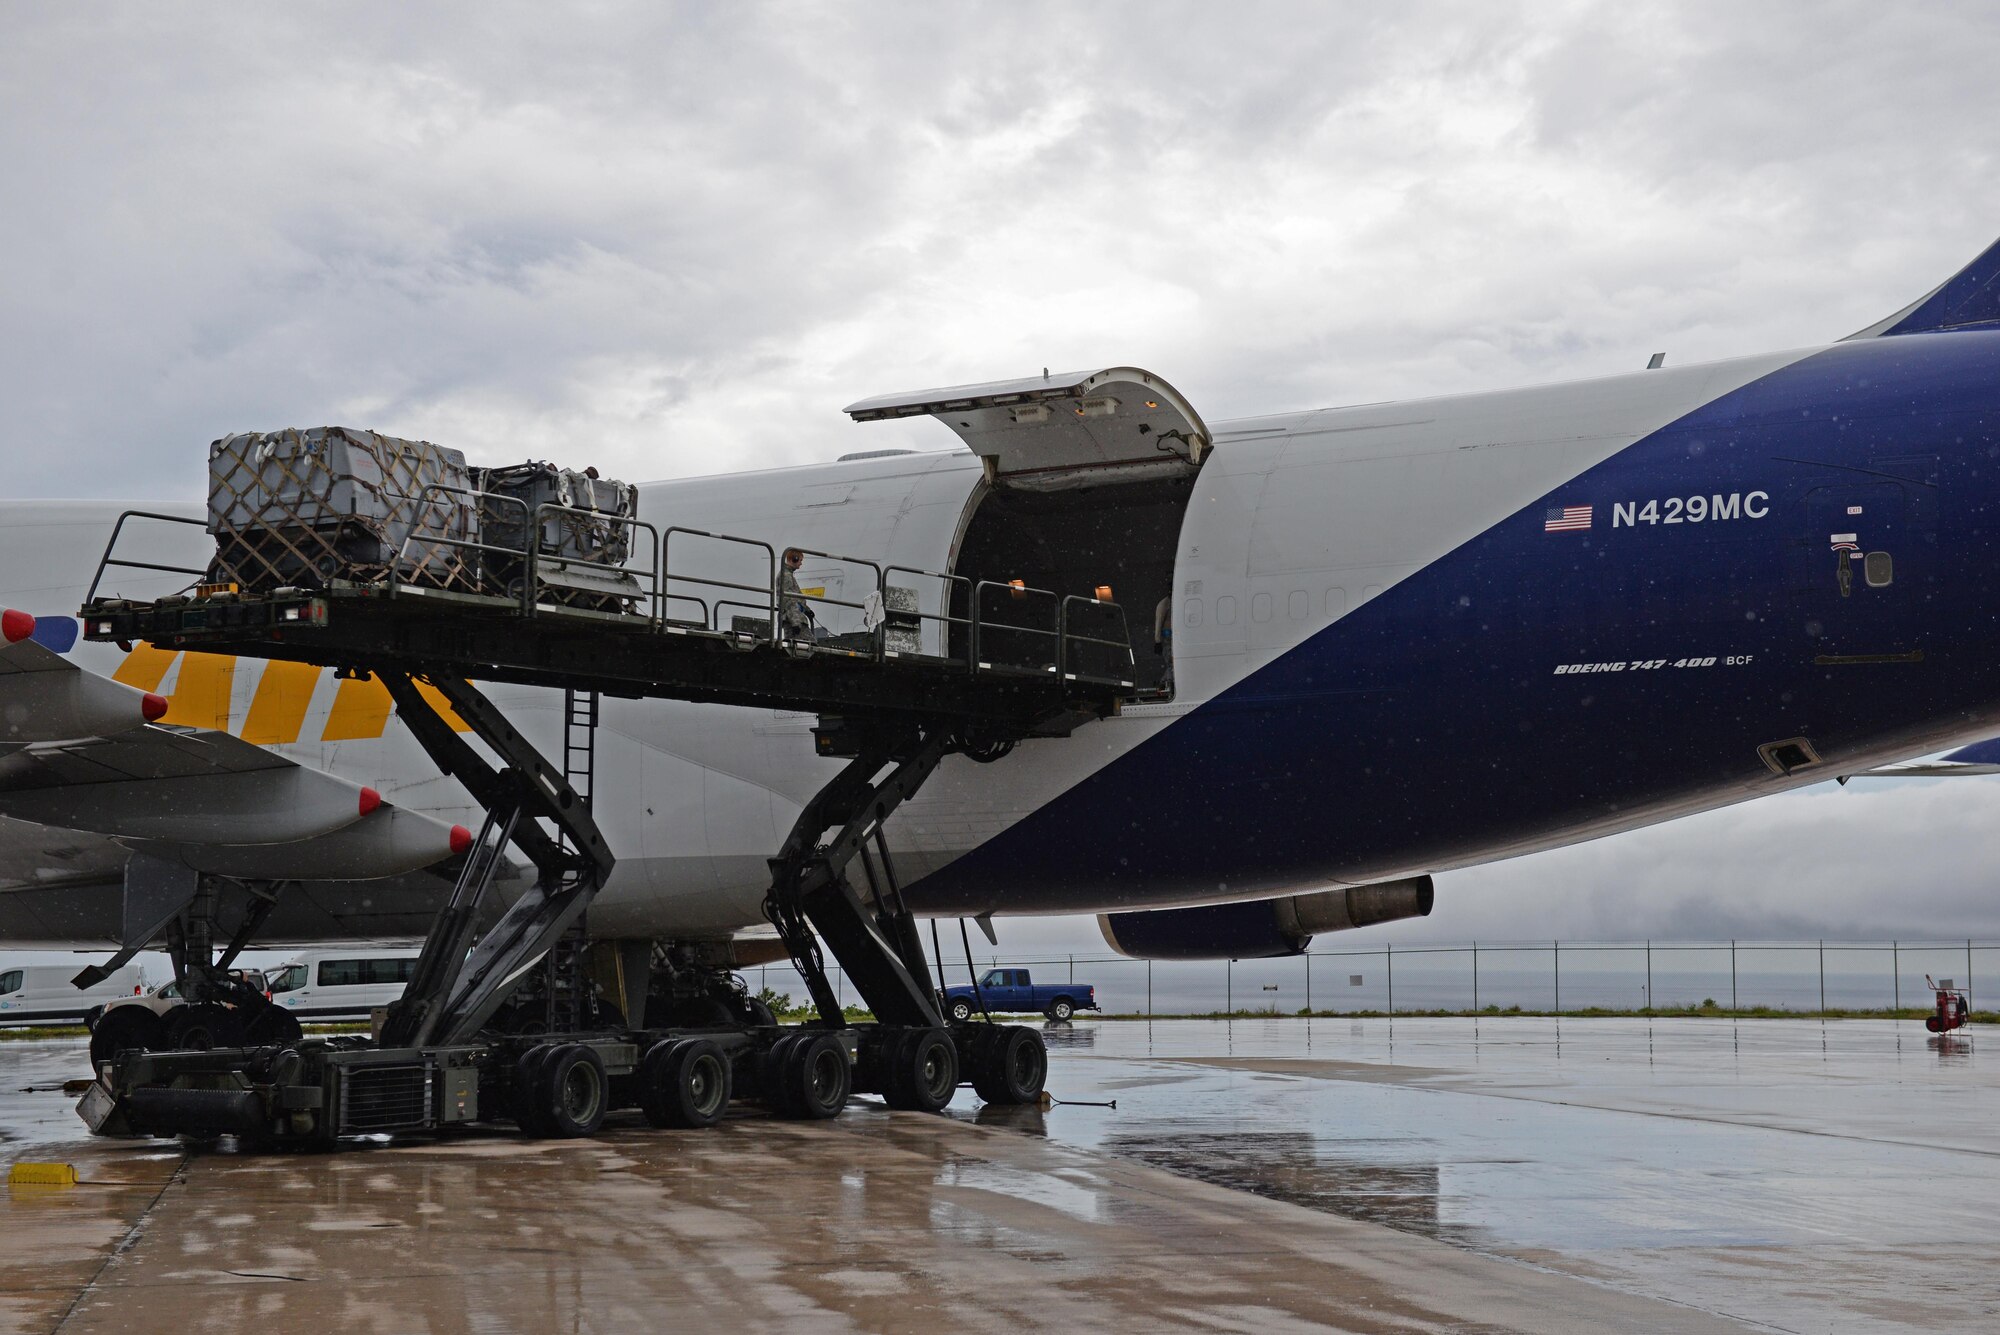 Airmen from the 734th Air Mobility Squadron unload a Boeing 747 onto a Tunner 60K aircraft cargo loader Sept. 7, 2016, at Andersen Air Force Base, Guam. The Tunner 60K aircraft cargo loader is capable of transporting up to six cargo pallets at a maximum speed of 23 mph. The vehicles deck elevates from 39 inches to 18 feet 6 inches high and employs a powered conveyor system to move cargo. (U.S. Air Force photo by Airman 1st Class Jacob Skovo)